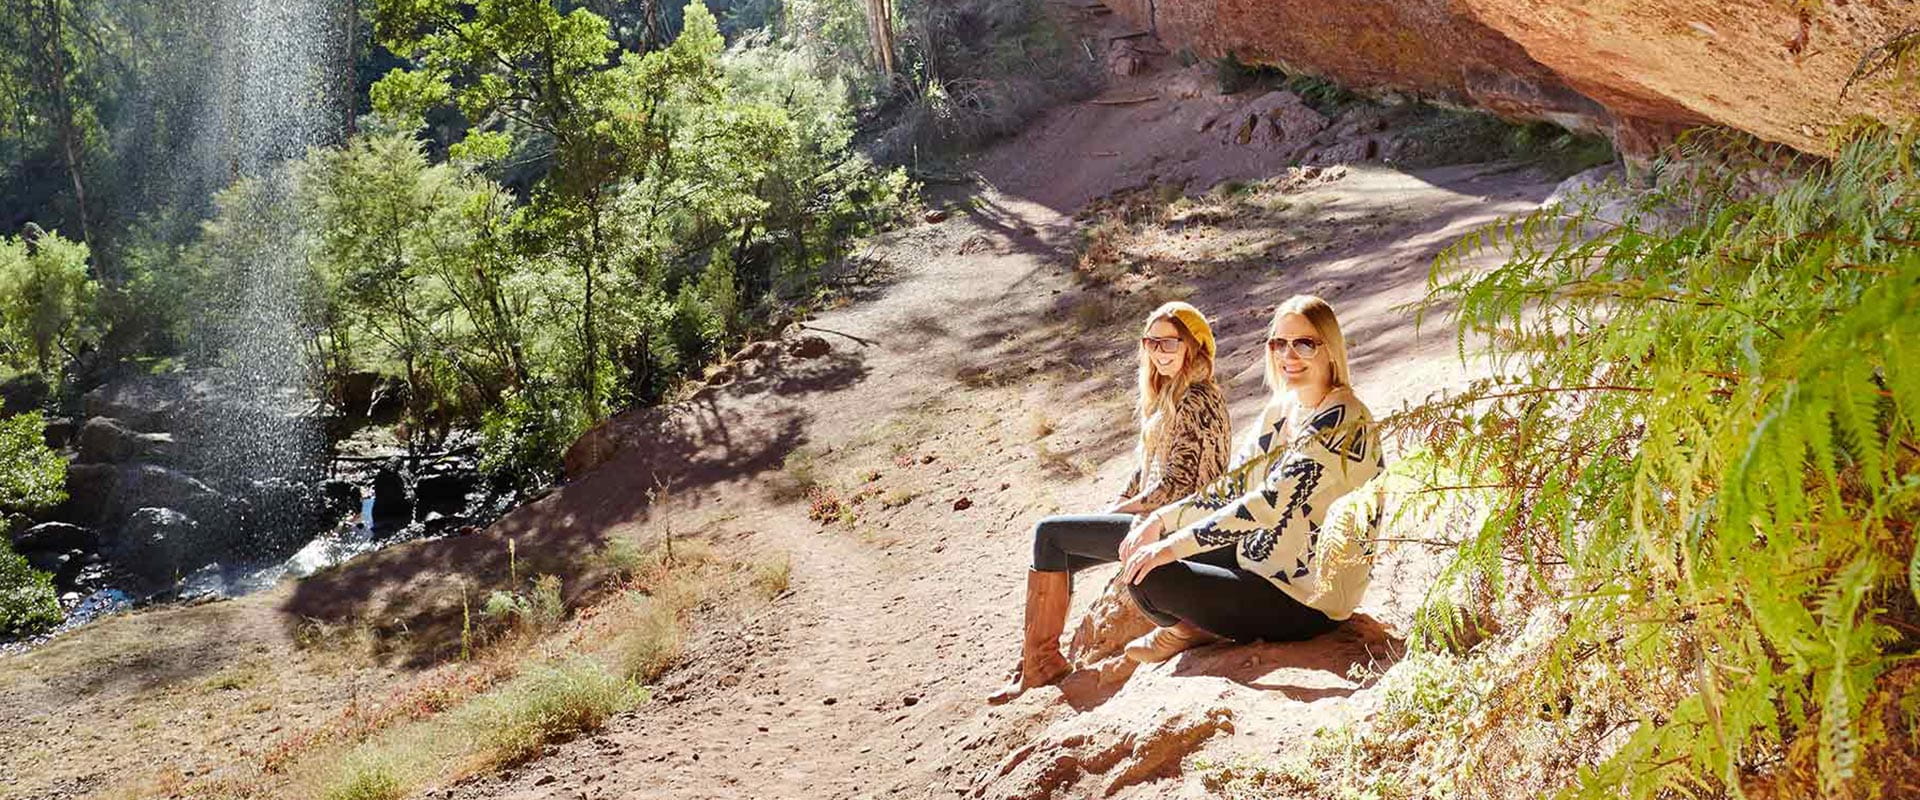 Two women sit in sun next to a mountain overlooking the waterfall.